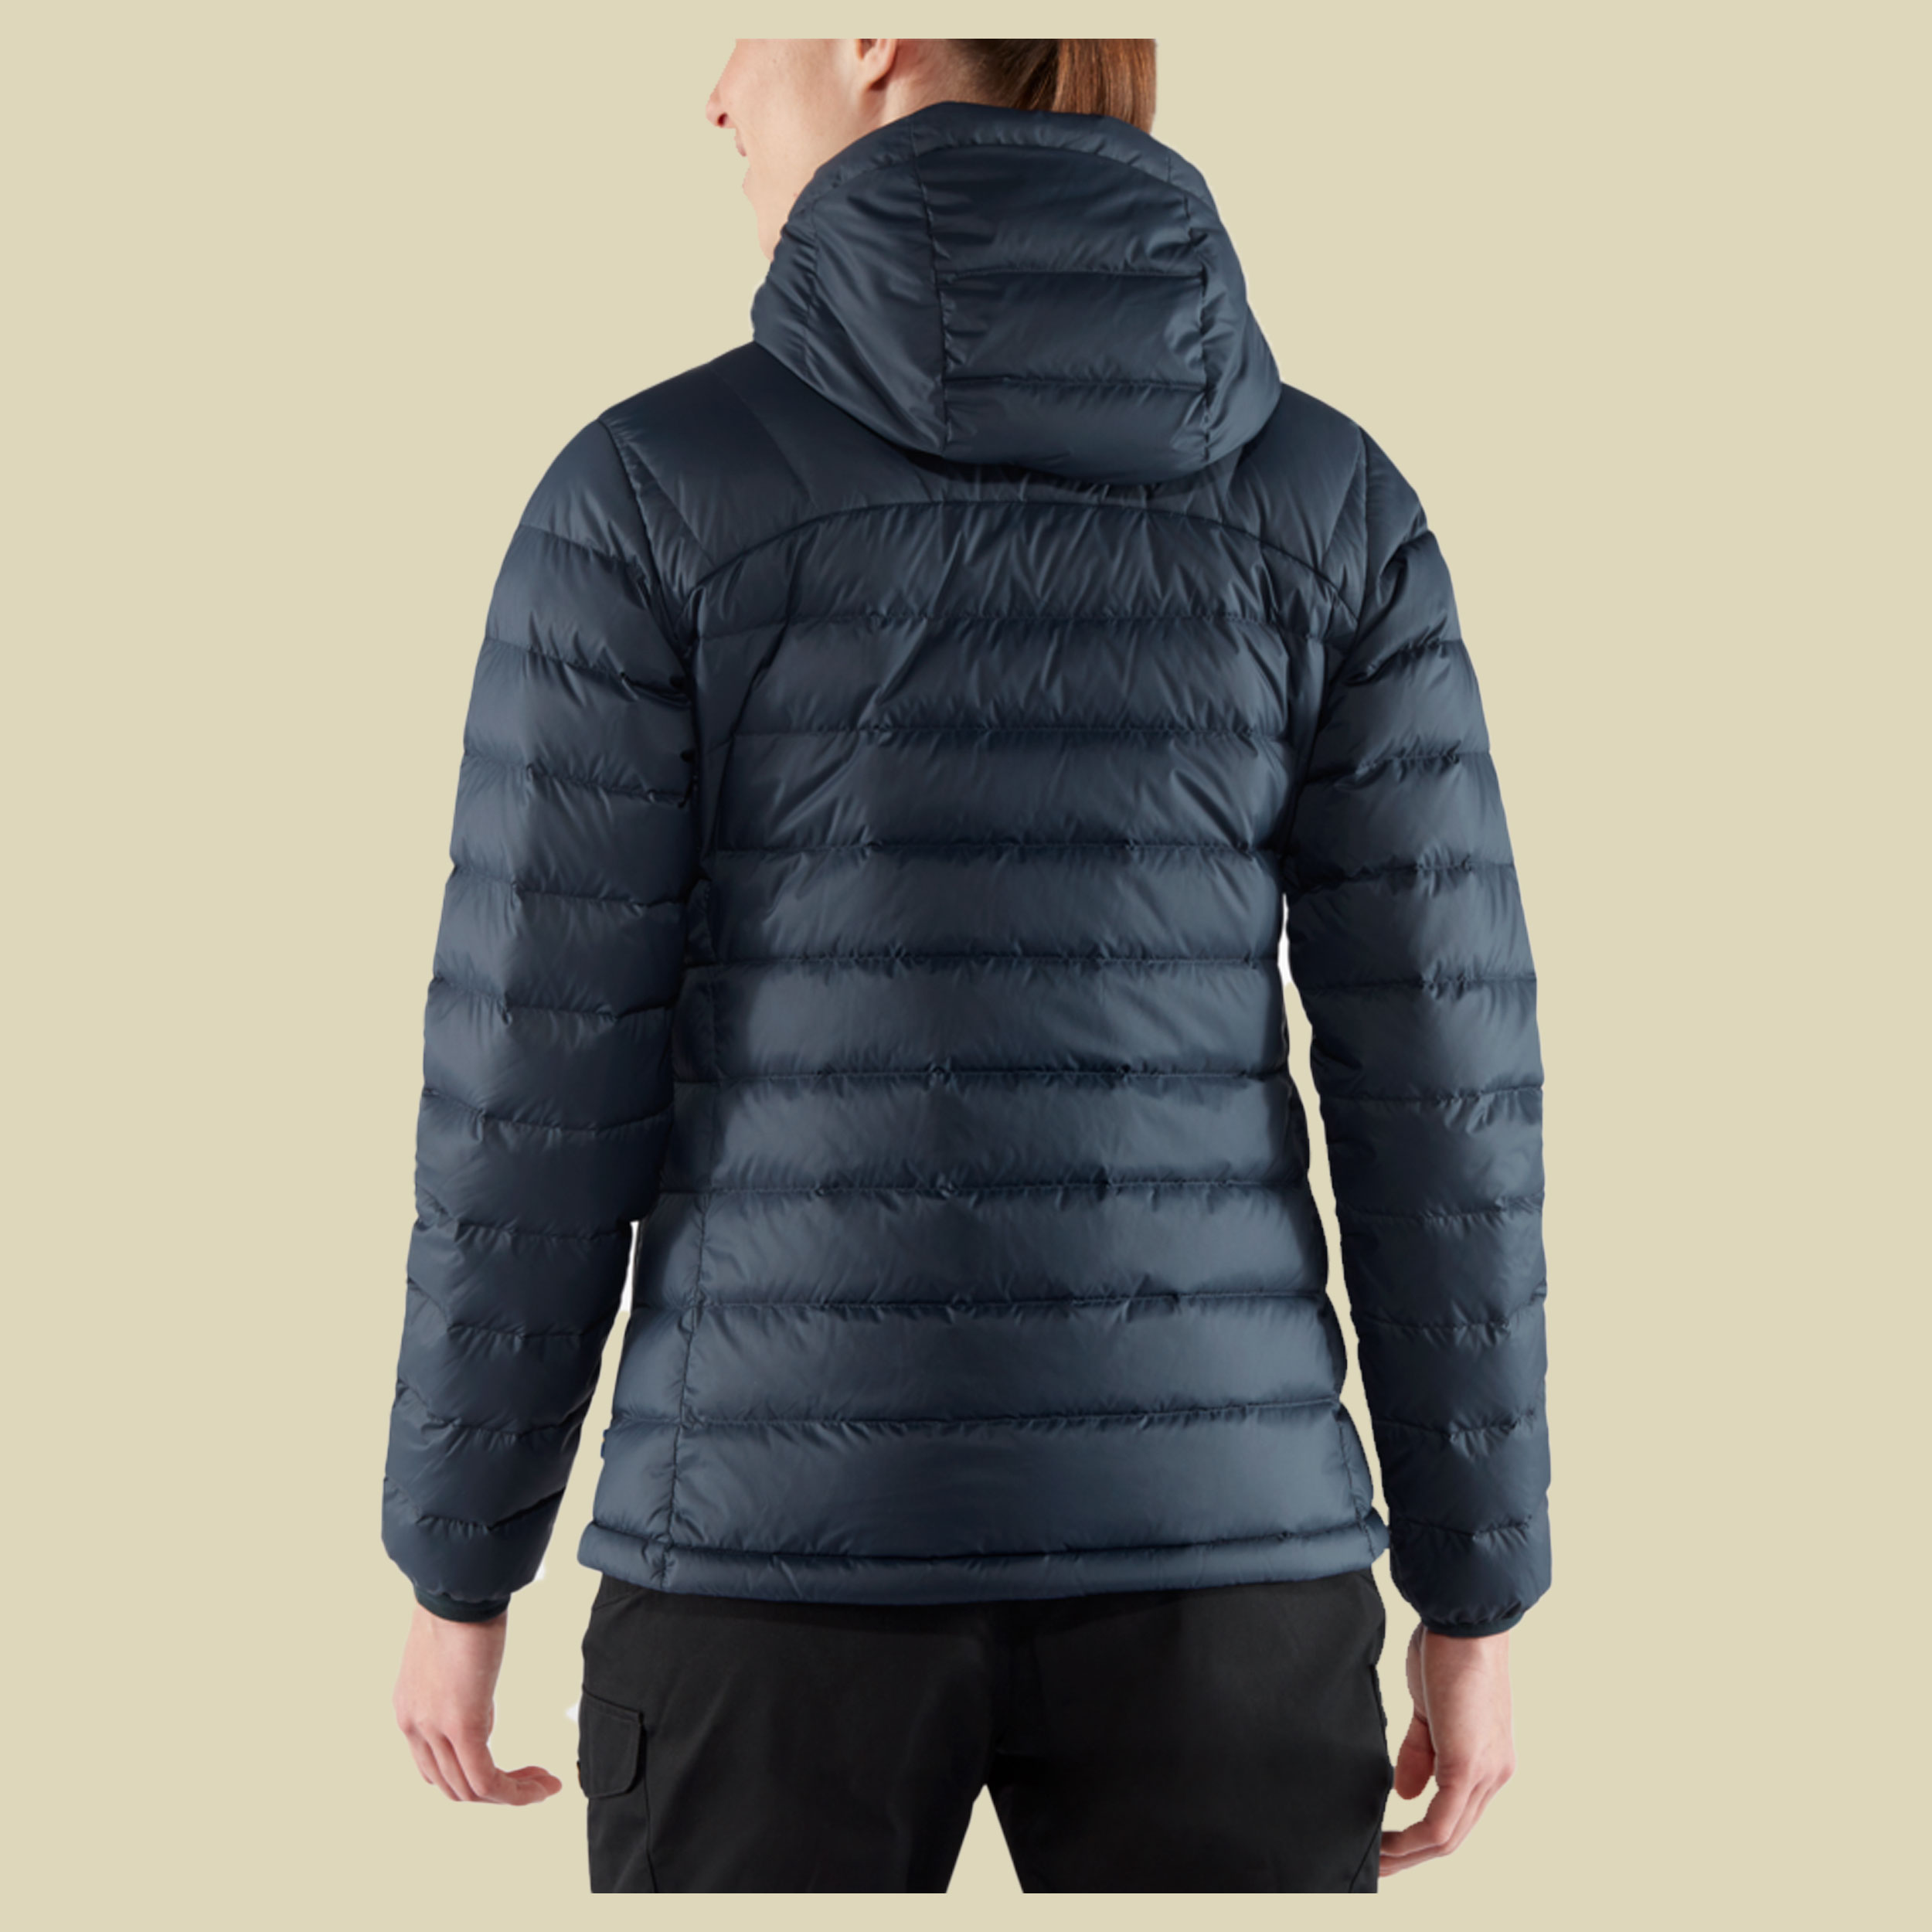 Expedition Pack Down Hoodie Women Größe S Farbe navy